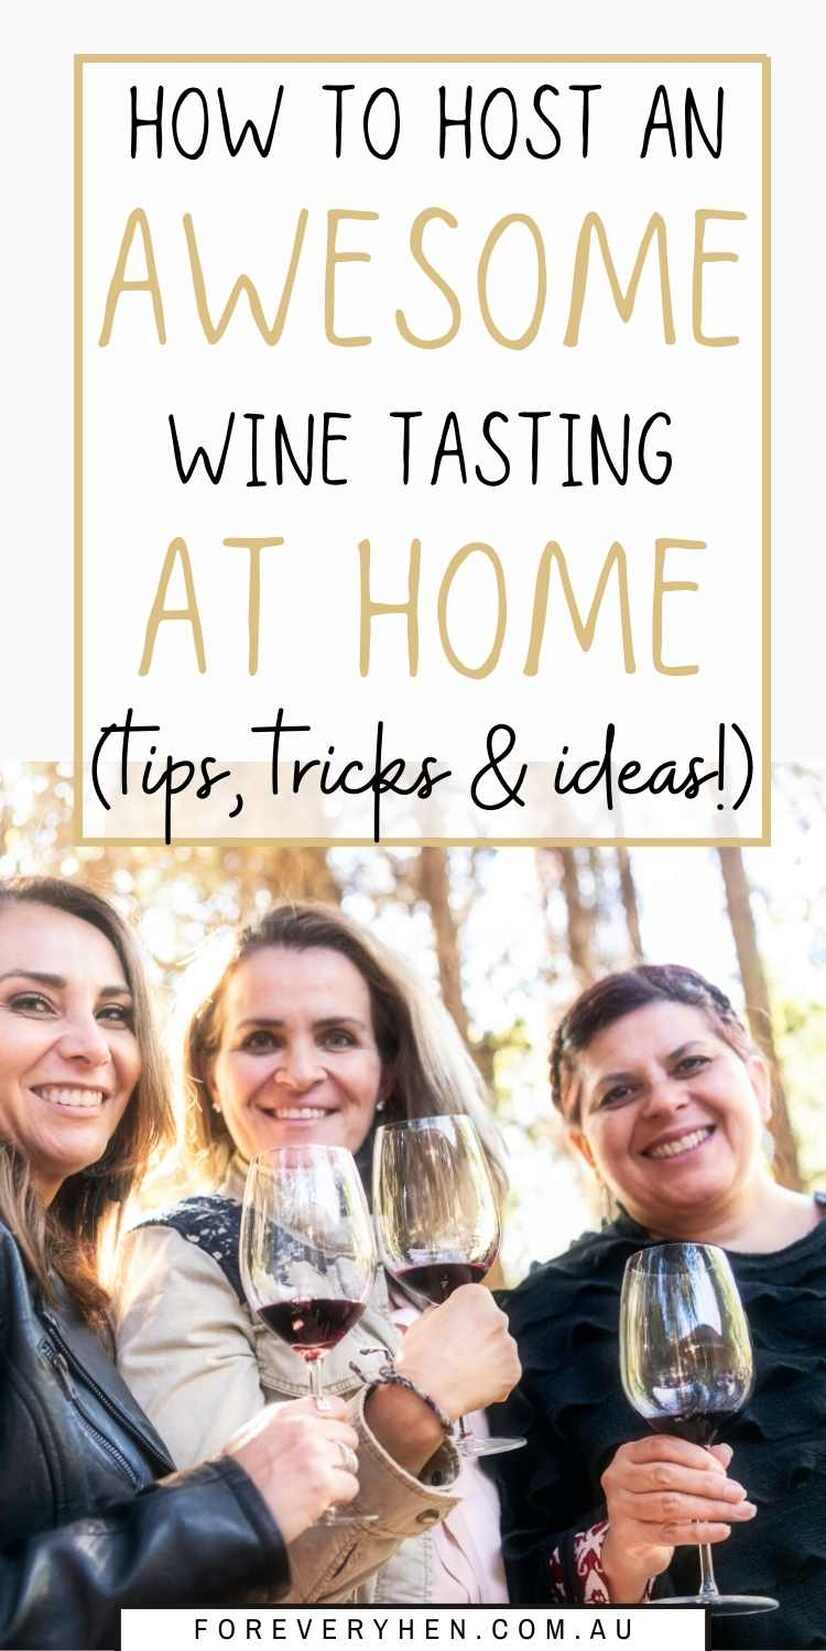 Three women standing near trees, each holding a glass of red wine. Text overlay: How to host an amazing wine tasting at home (Tips, tricks and ideas!)